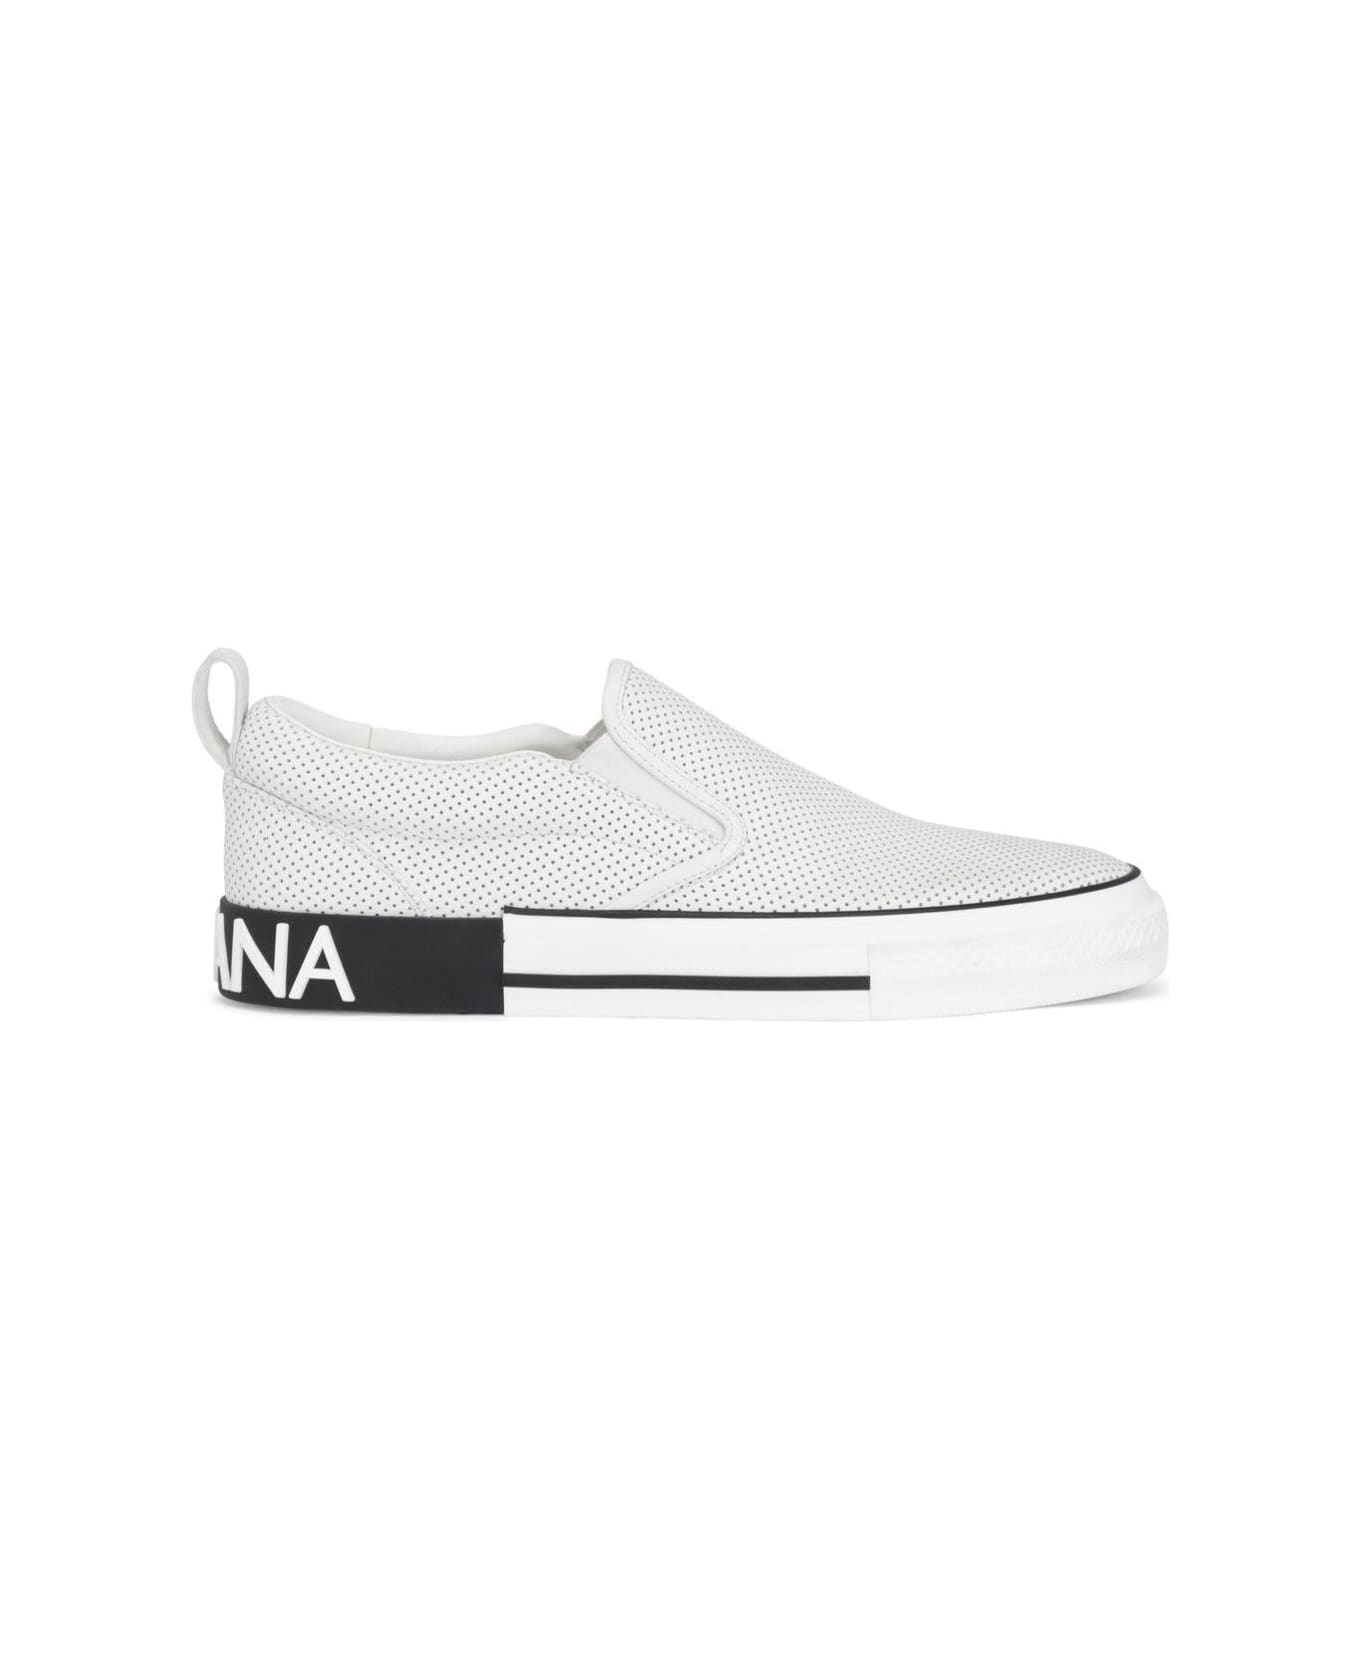 Dolce & Gabbana 'custom 2.zero' White Slip-on Sneakers With Contrasting Logo In Leather Blend Man - White